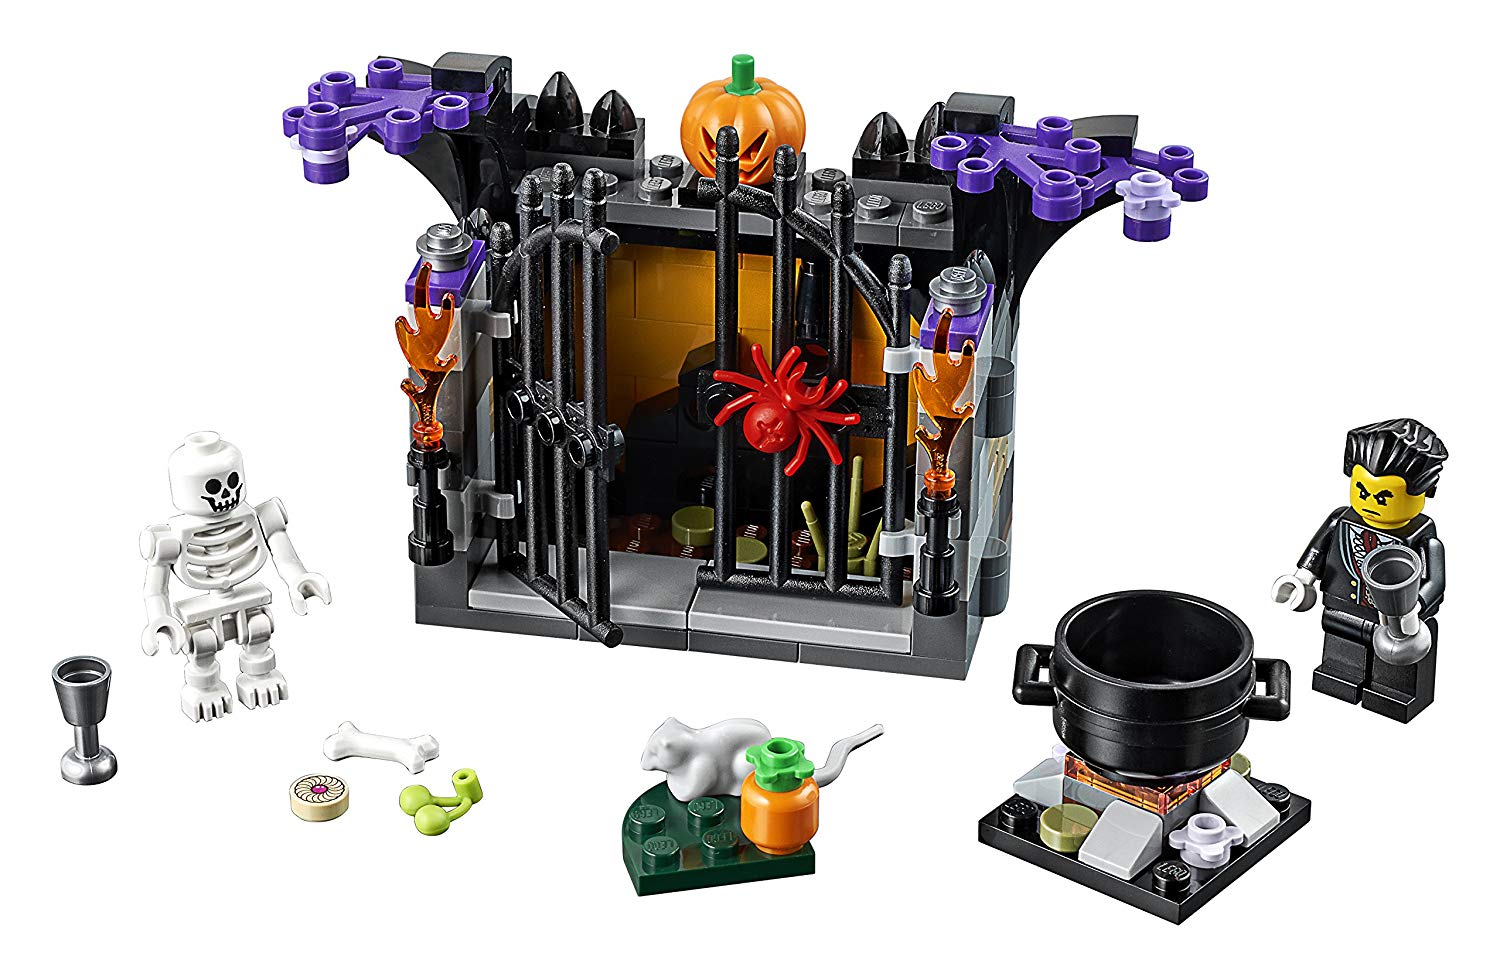 Best Halloween Gifts 2022: LEGO Haunted House Set for Kids 2022